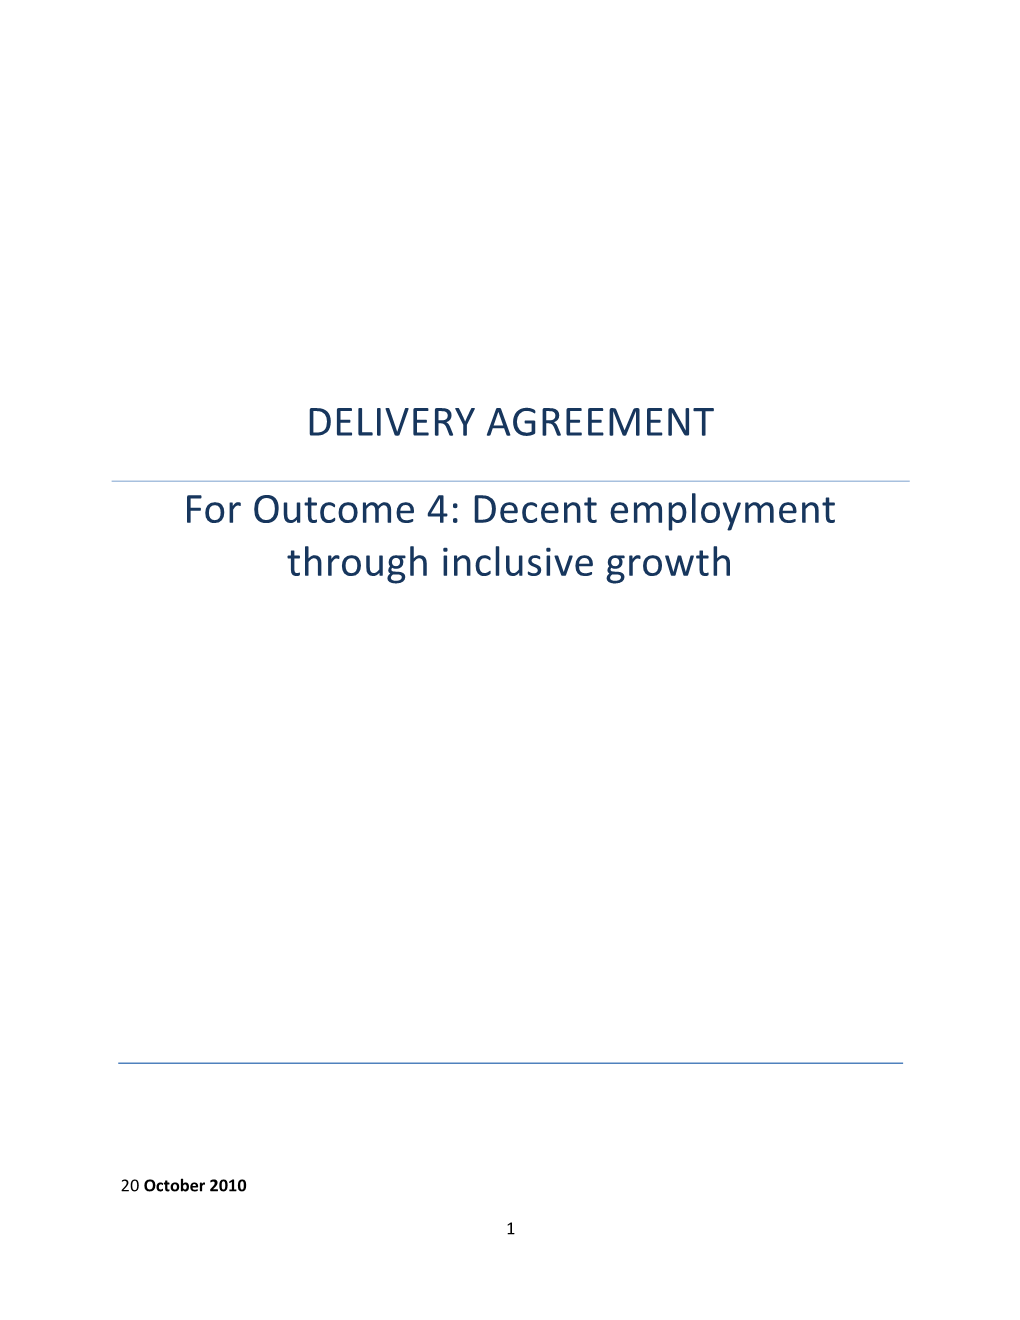 DELIVERY AGREEMENT for Outcome 4: Decent Employment Through Inclusive Growth